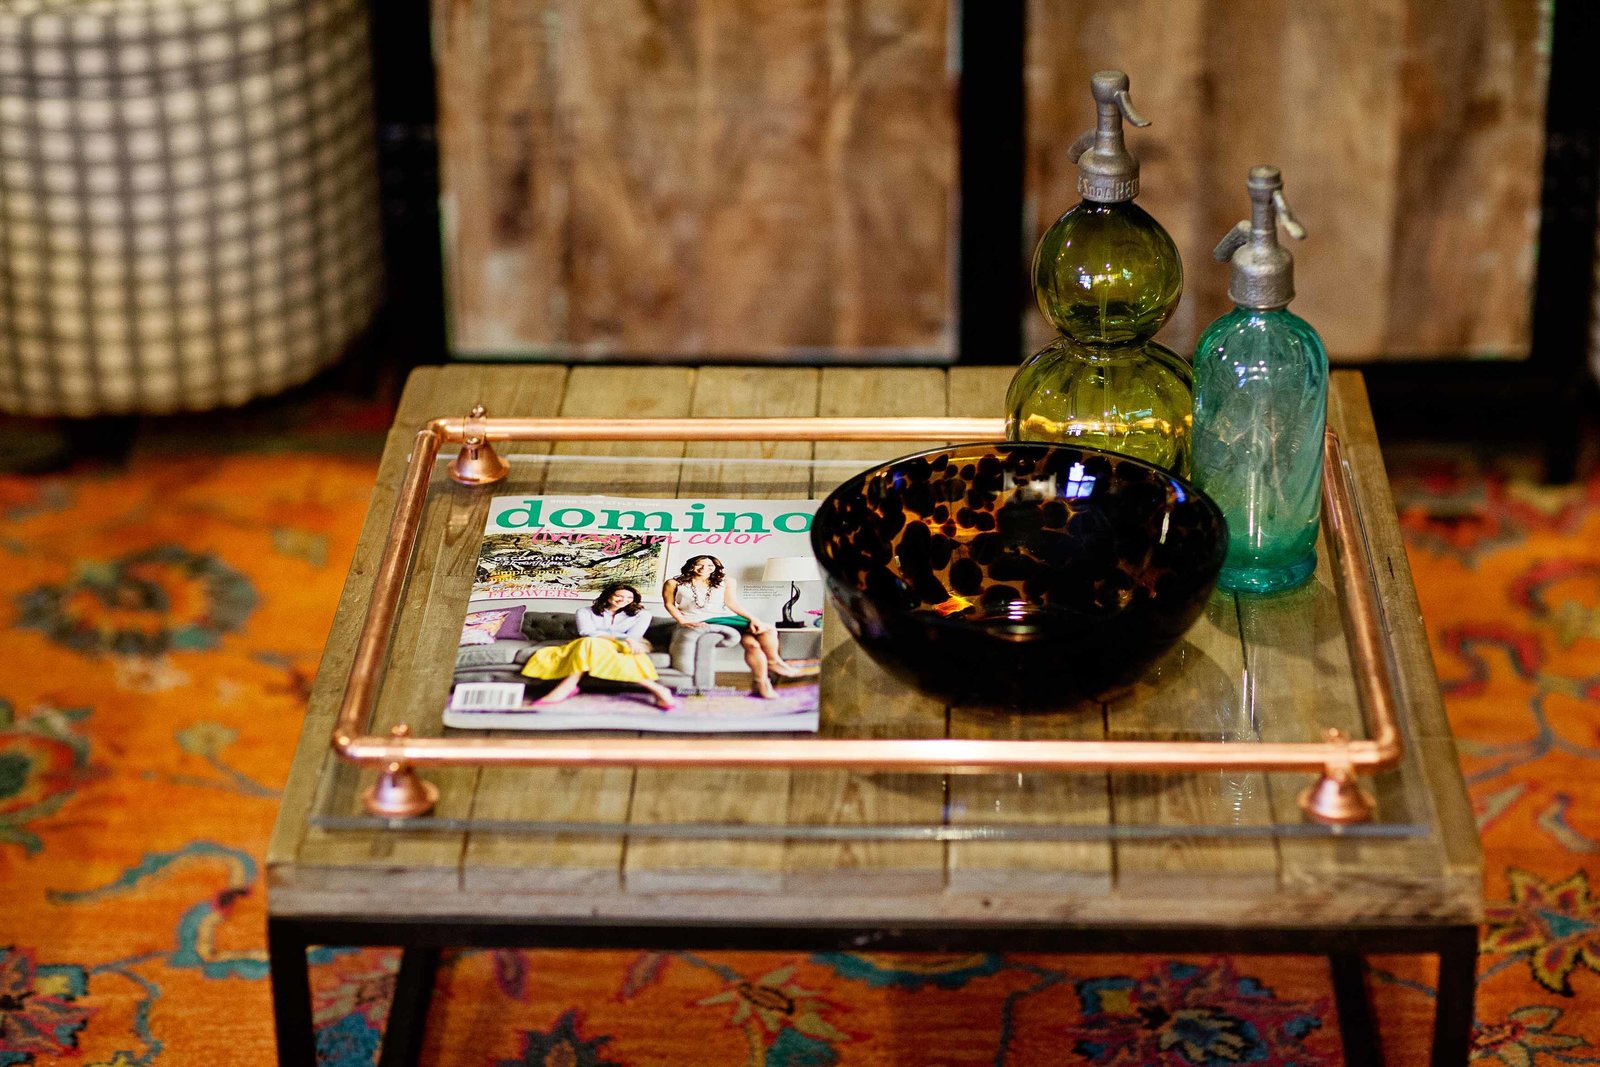 A coffee table with glass dishes and a domino magazine.